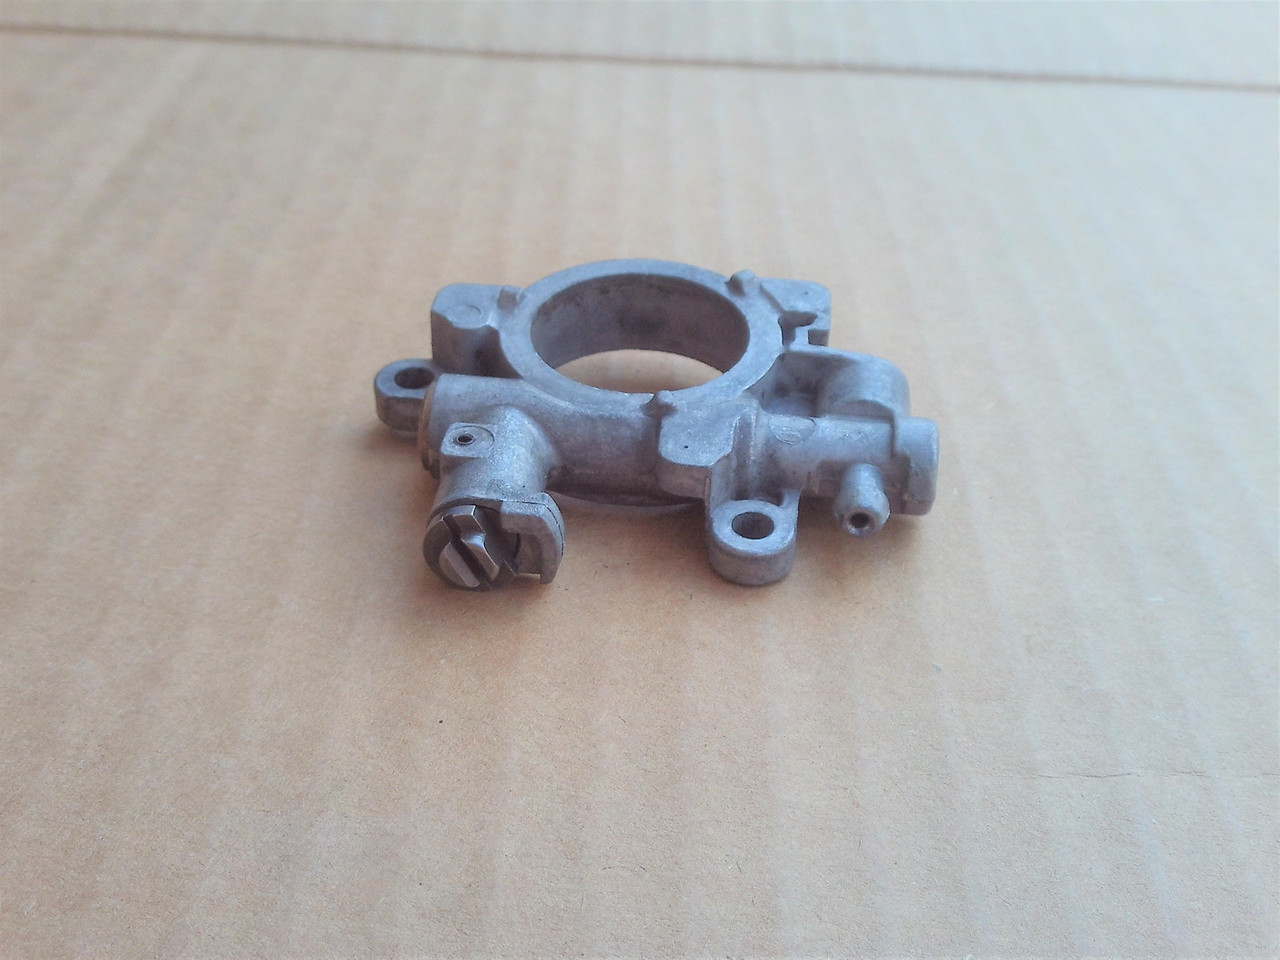 Stihl Oil Pump for 029 039 MS290 MS310 MS390 MS311 MS390 1127-640-3204 11276403204 1127 640 3204